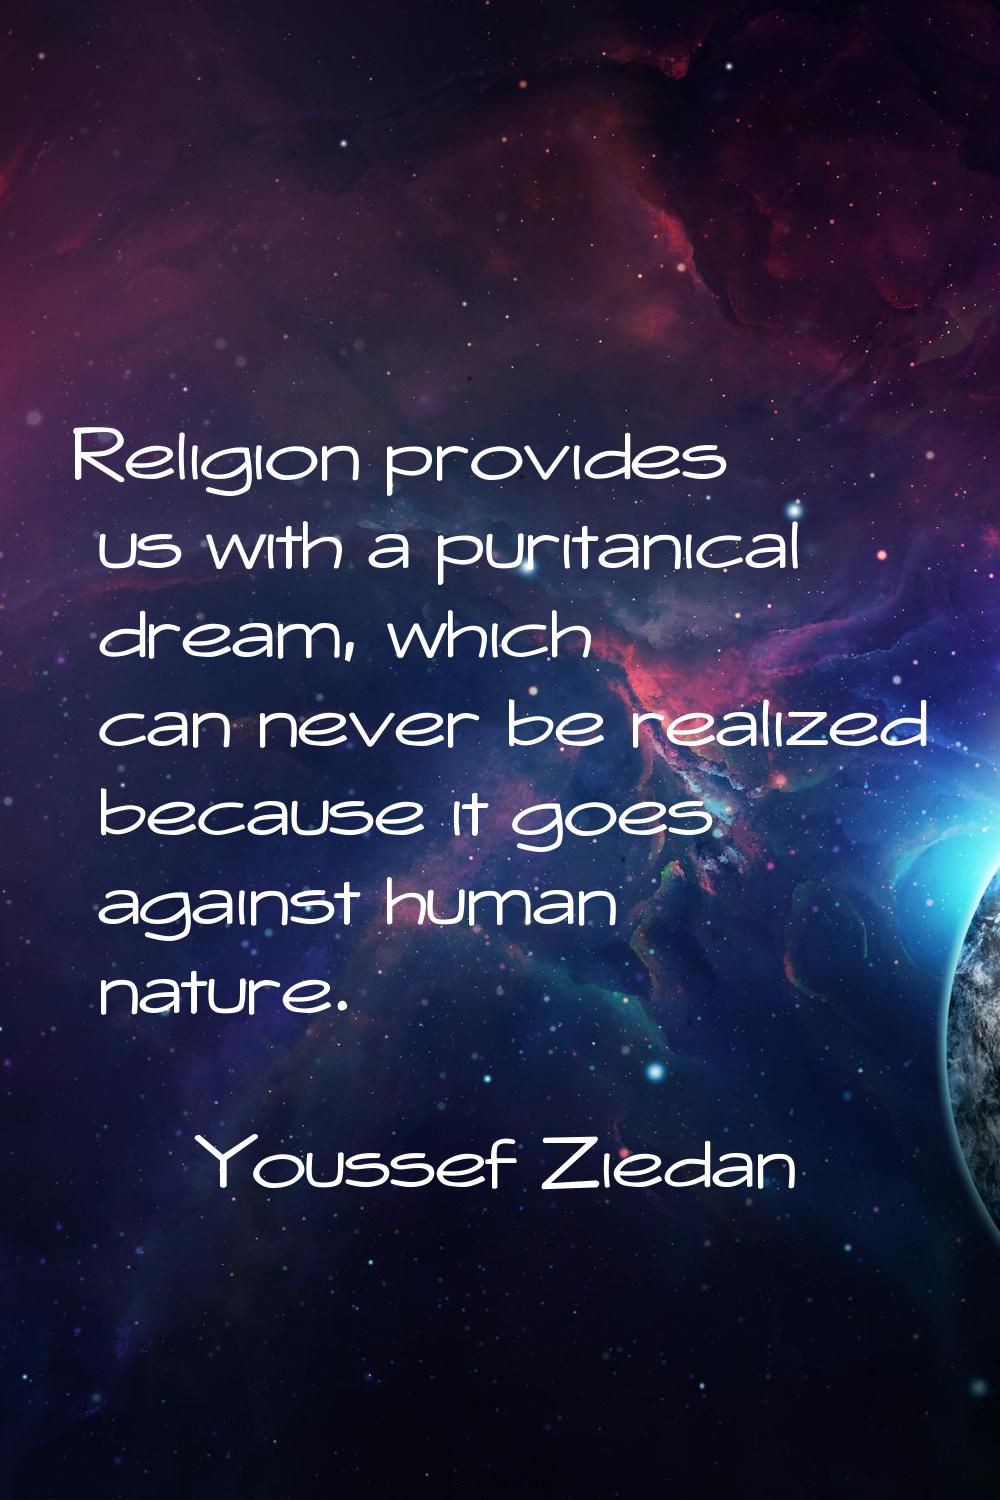 Religion provides us with a puritanical dream, which can never be realized because it goes against 